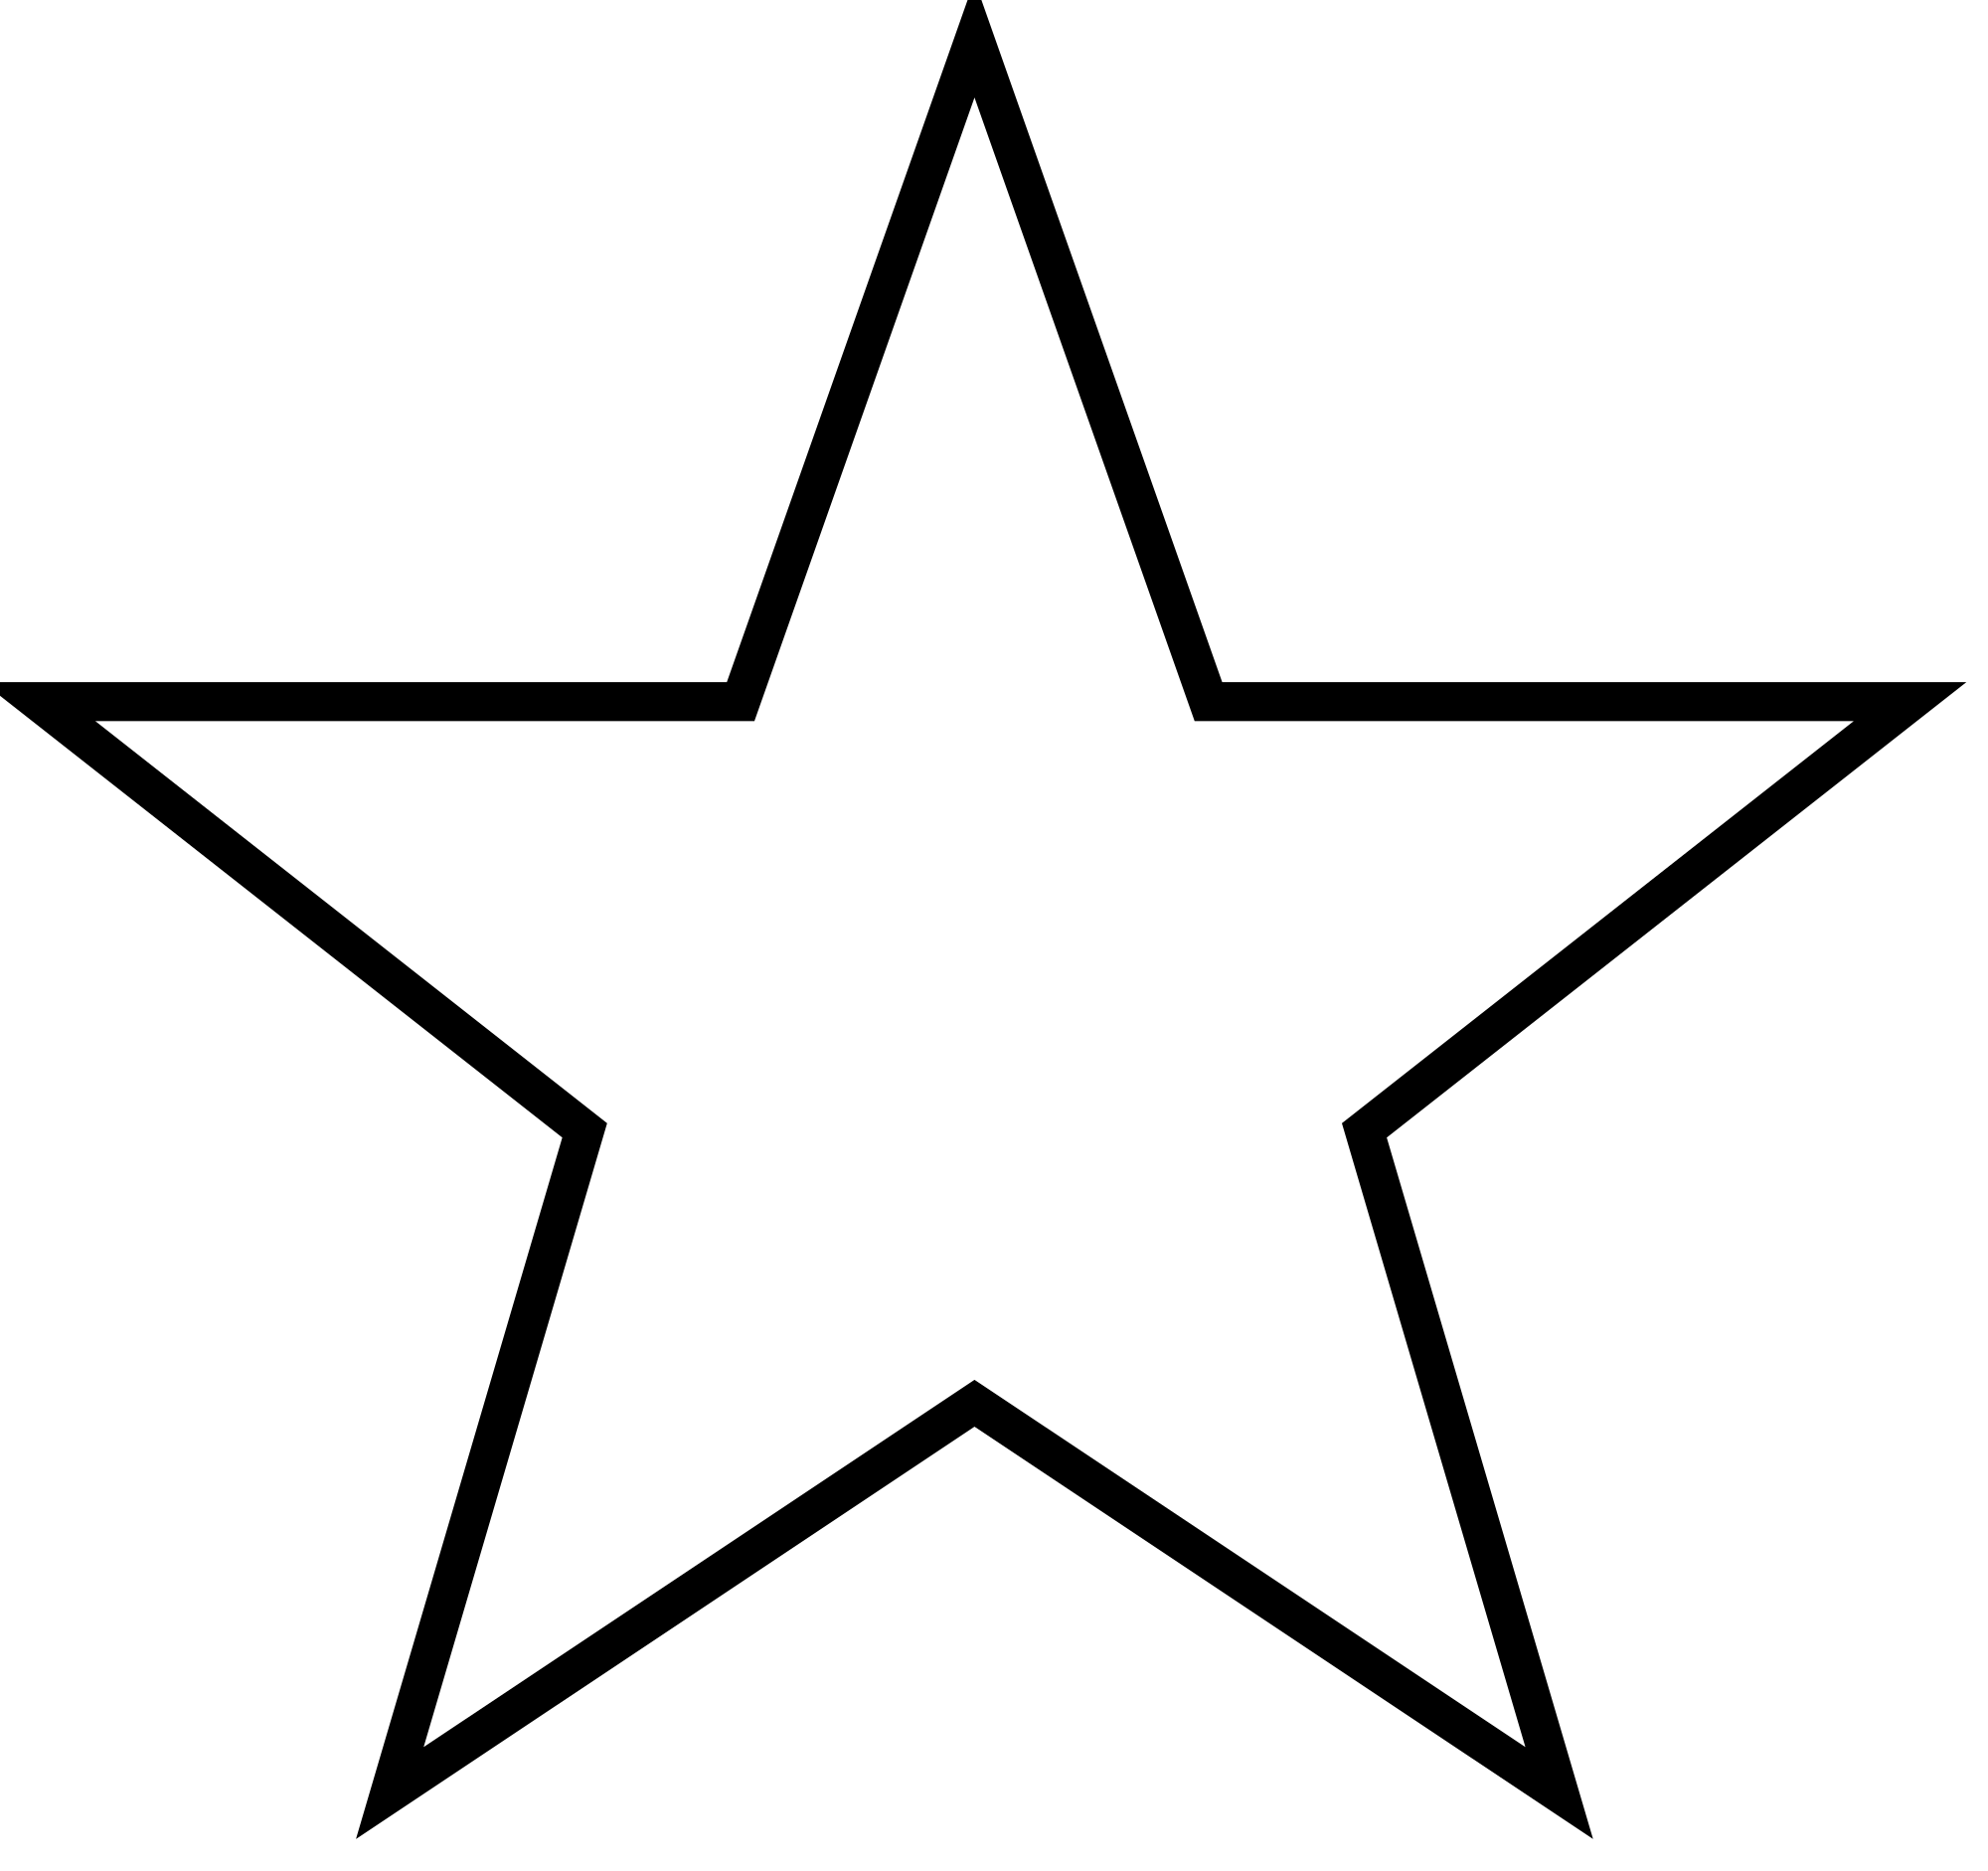 Red Three-Point Star Logo - Five-pointed star